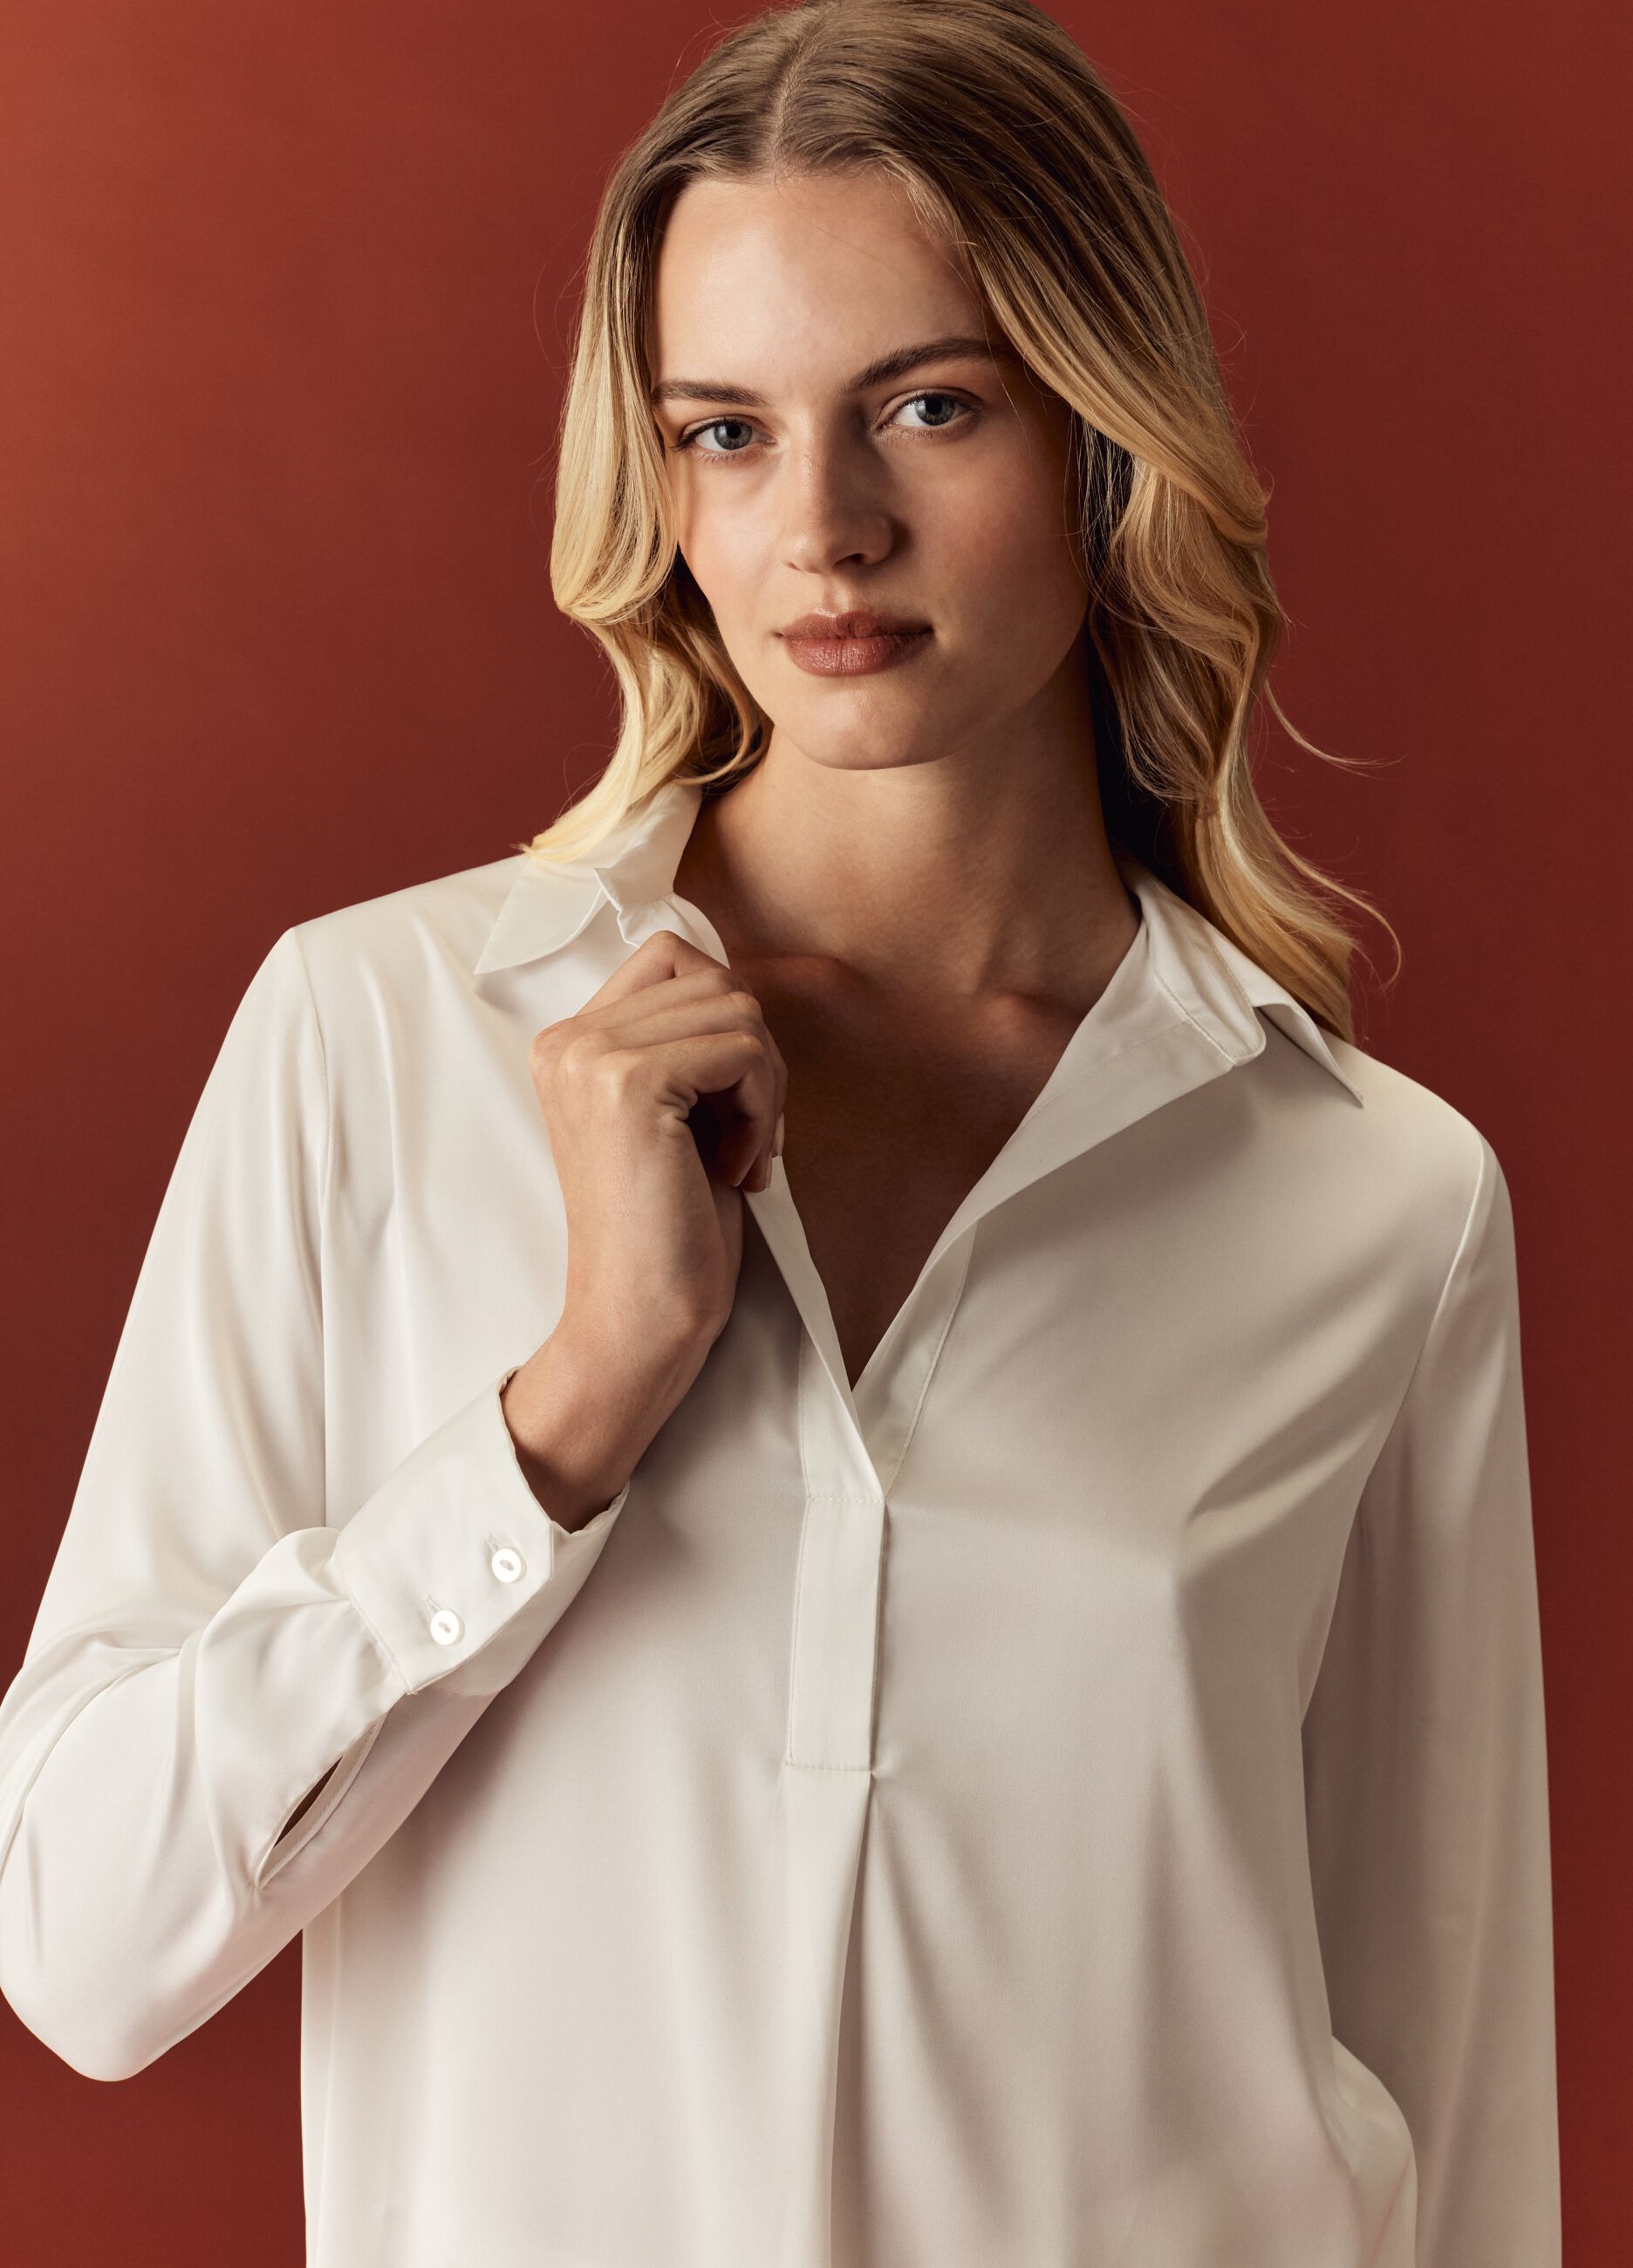 Satin shirt with V opening